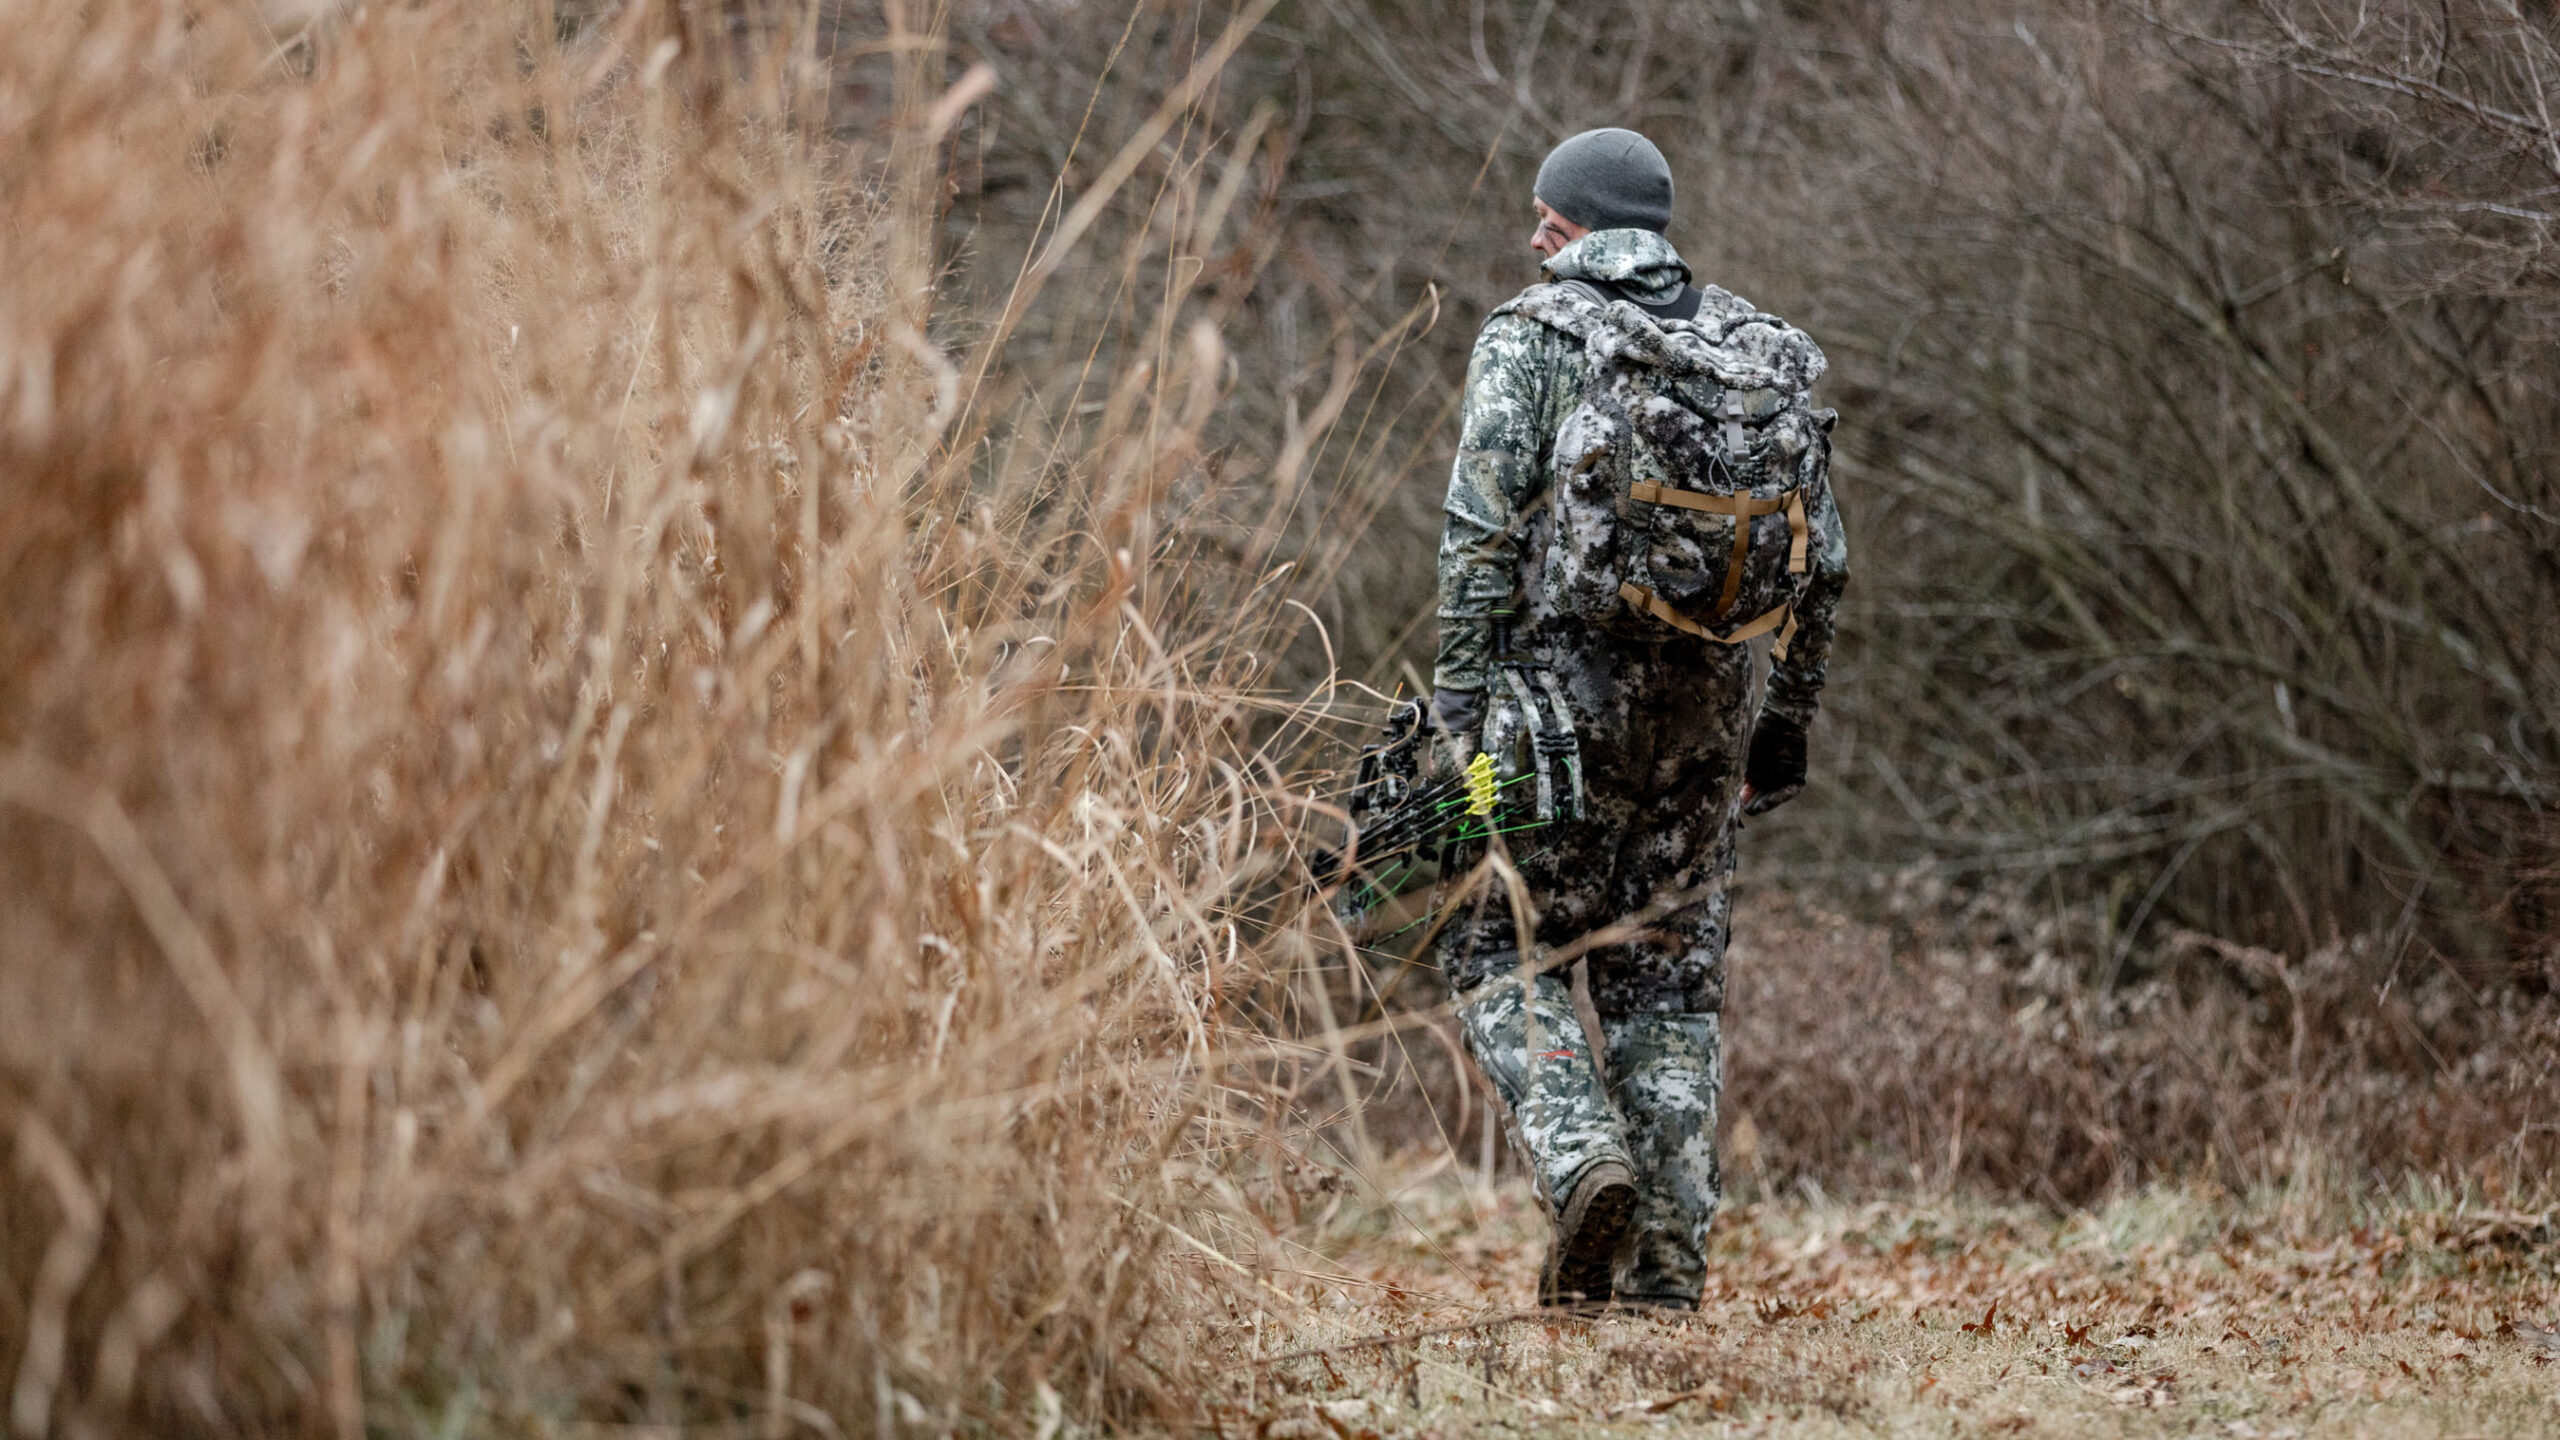 WHITETAIL STAND ENTRY & EXIT STRATEGIES